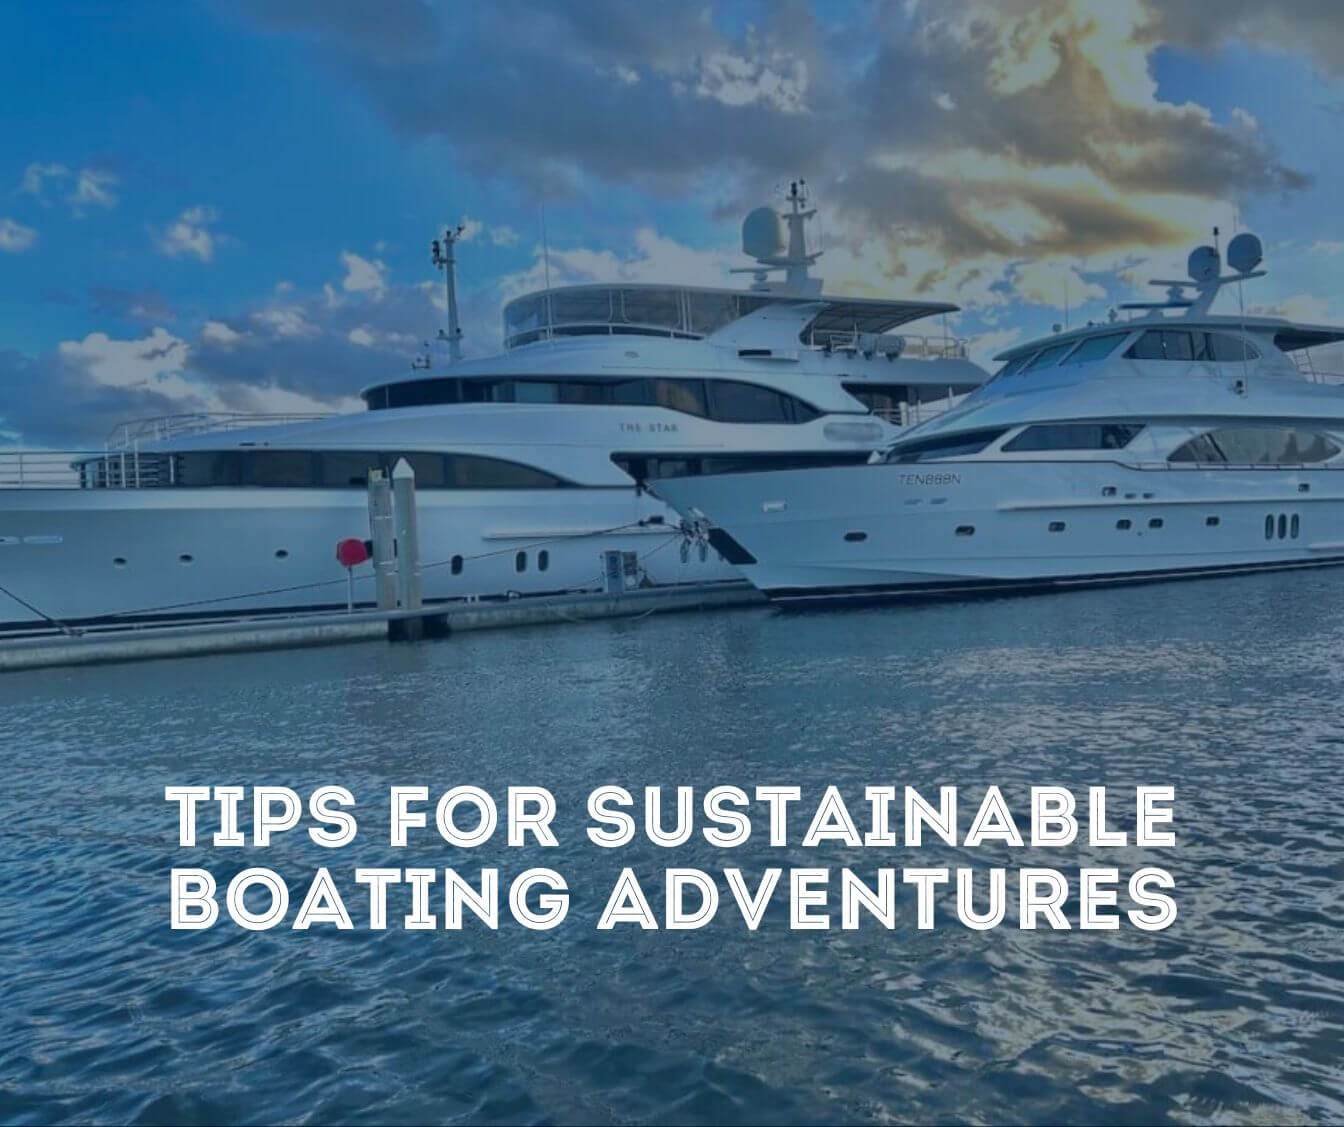 Tips for Sustainable Boating Adventures